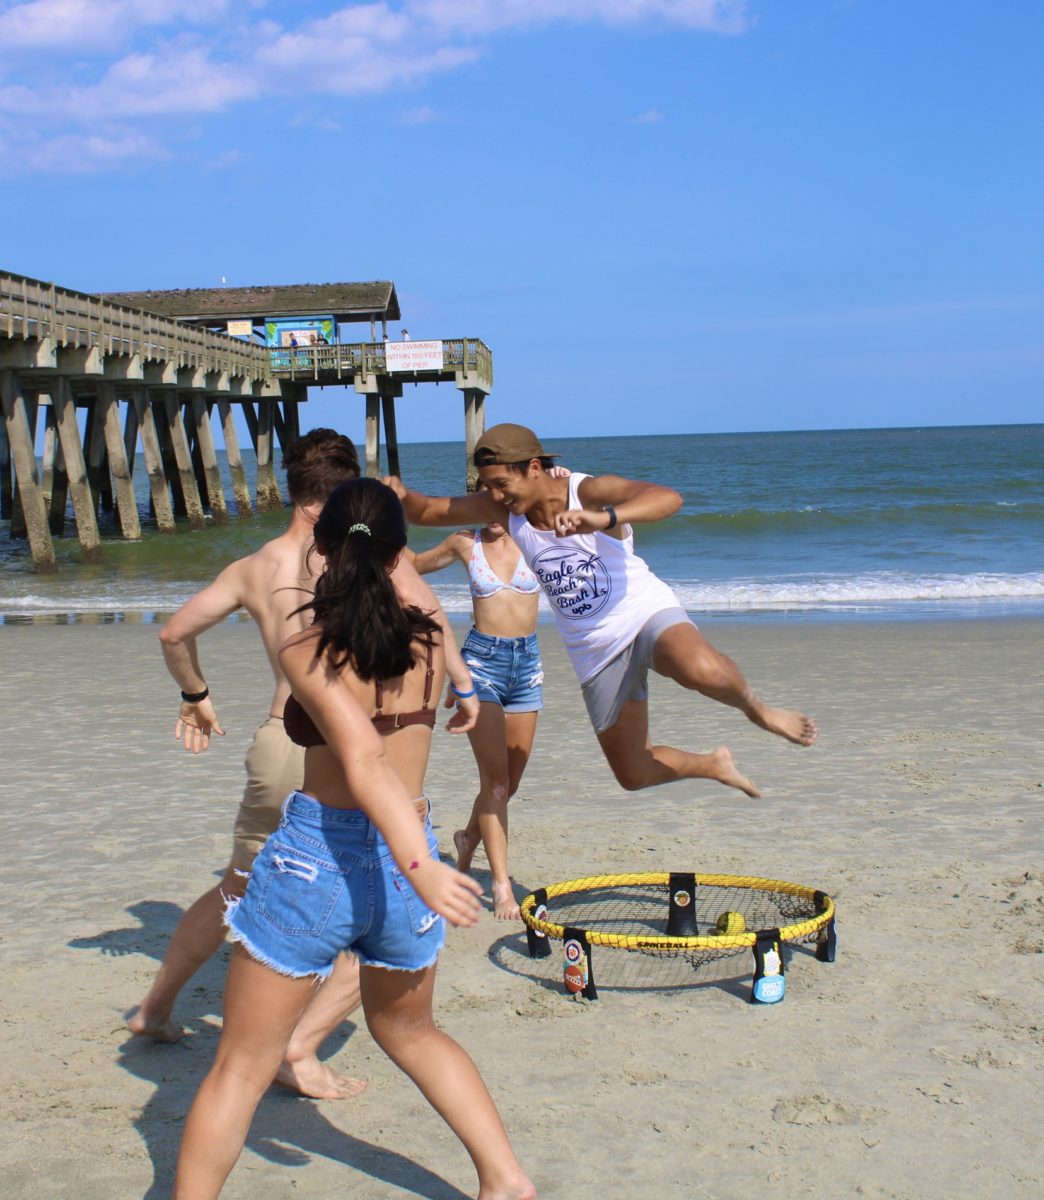 Members of Armstrongs Spikeball club enjoy a round on the beach.